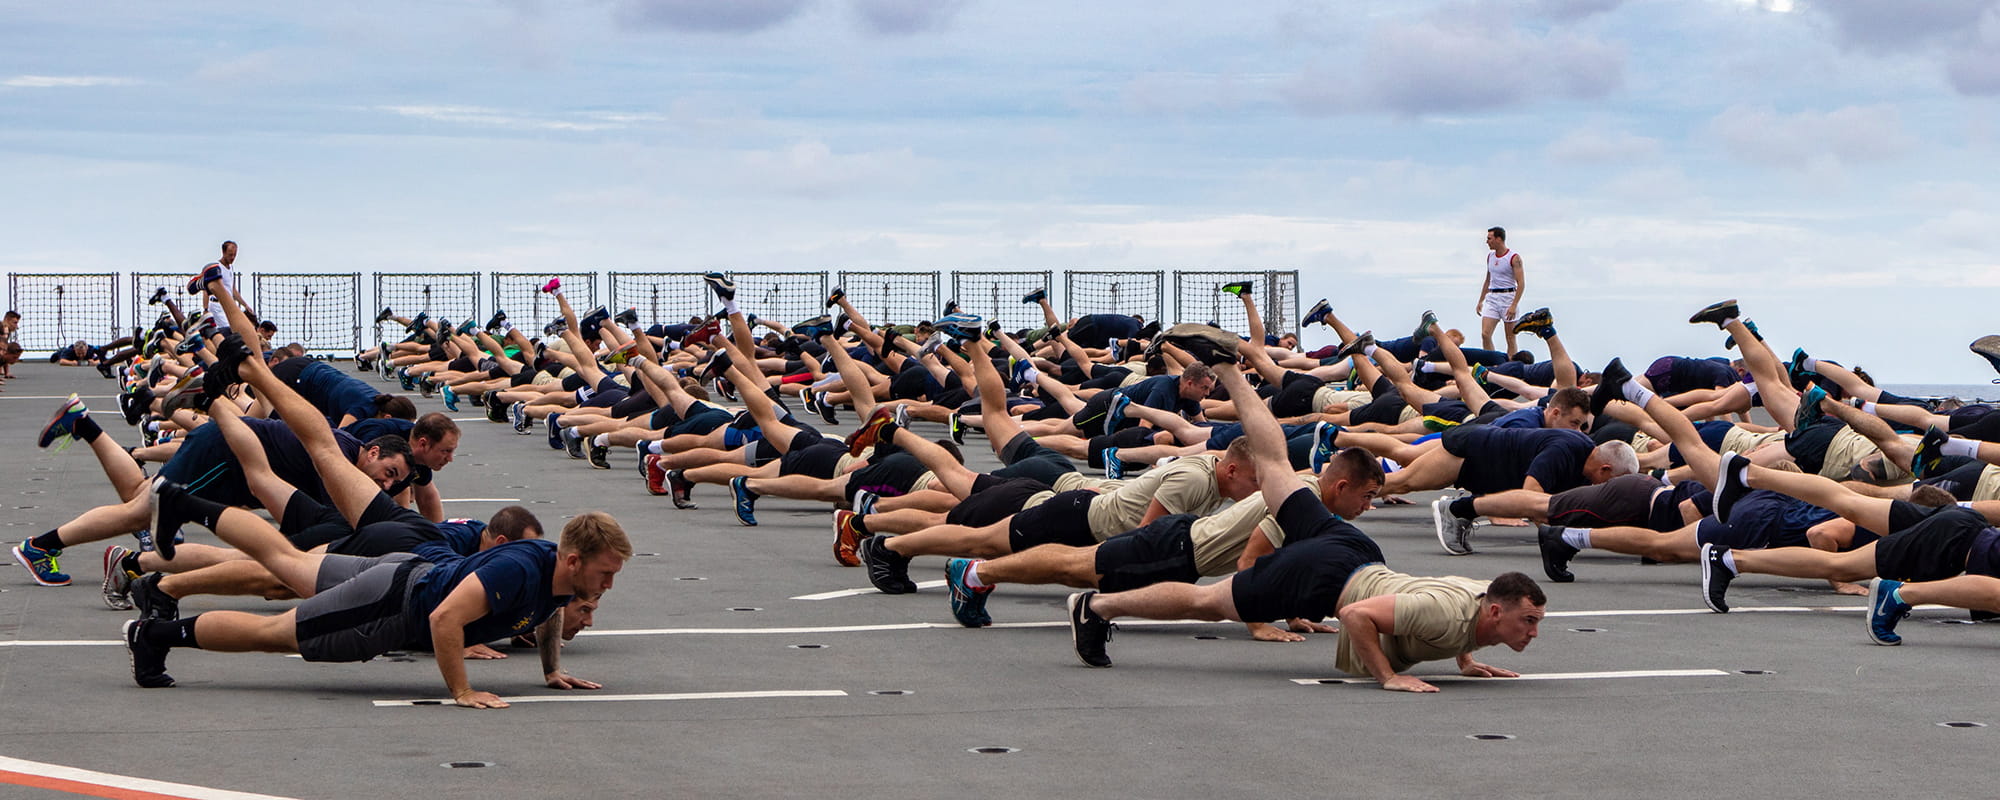 Pictured is PTI (Physical Training Instructor) Cpl Andrew Orchard of 40 Commando, Royal Marines taking the ship’s company and Charlie Company for an IMF (Initial Military Fitness) session on the flight deck of HMS Albion.